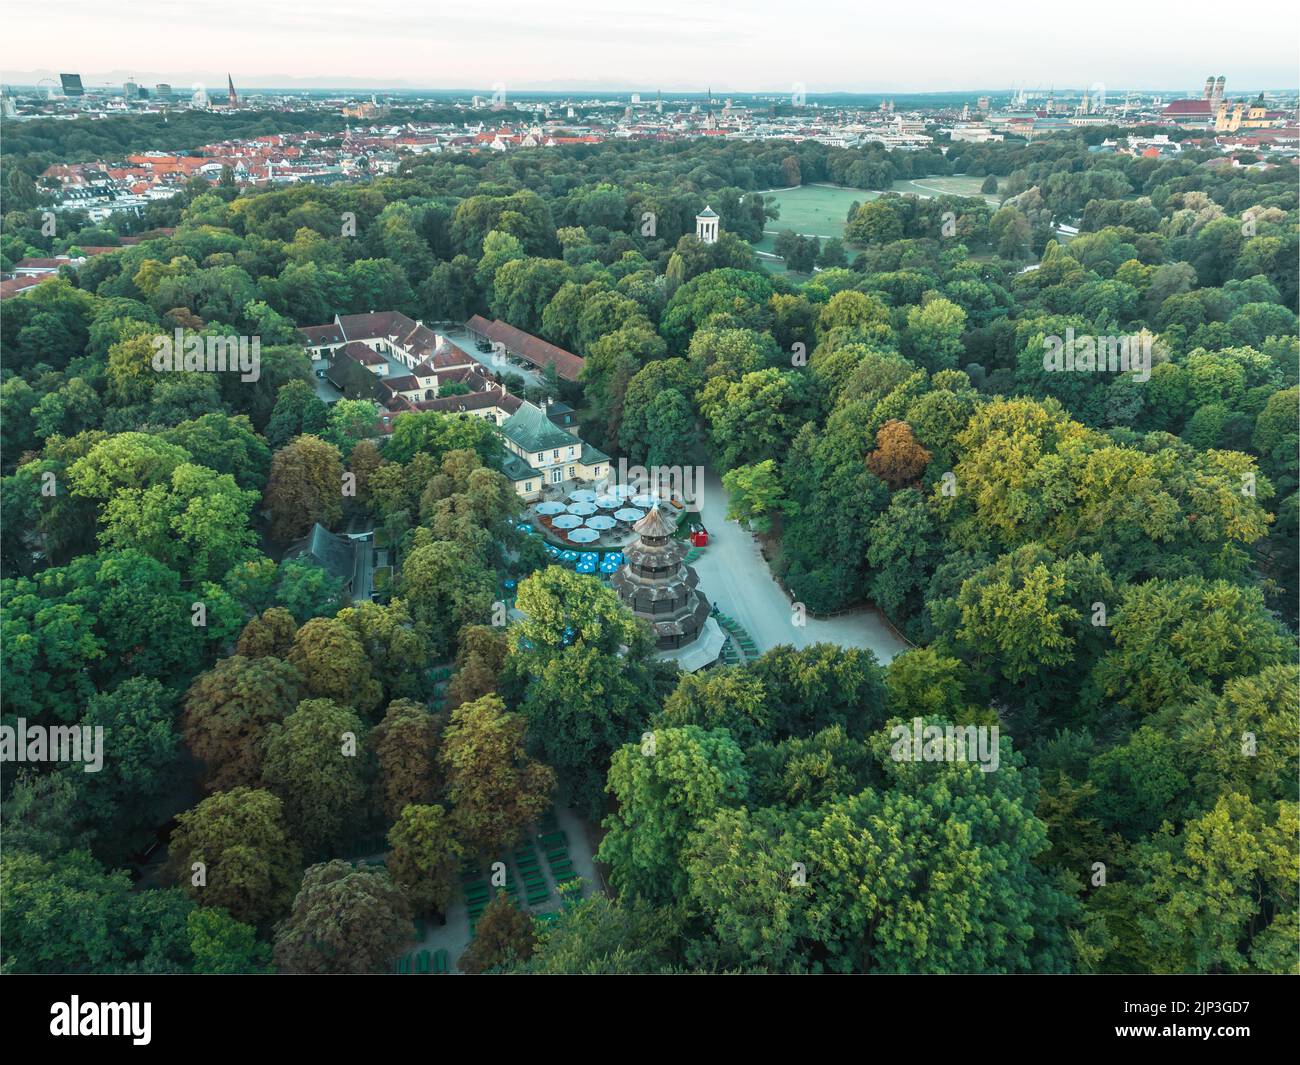 Aerial view of Chinese tower in Munich city park. Large central beer garden in English garden, popular summer destination for tourists and residents. Stock Photo